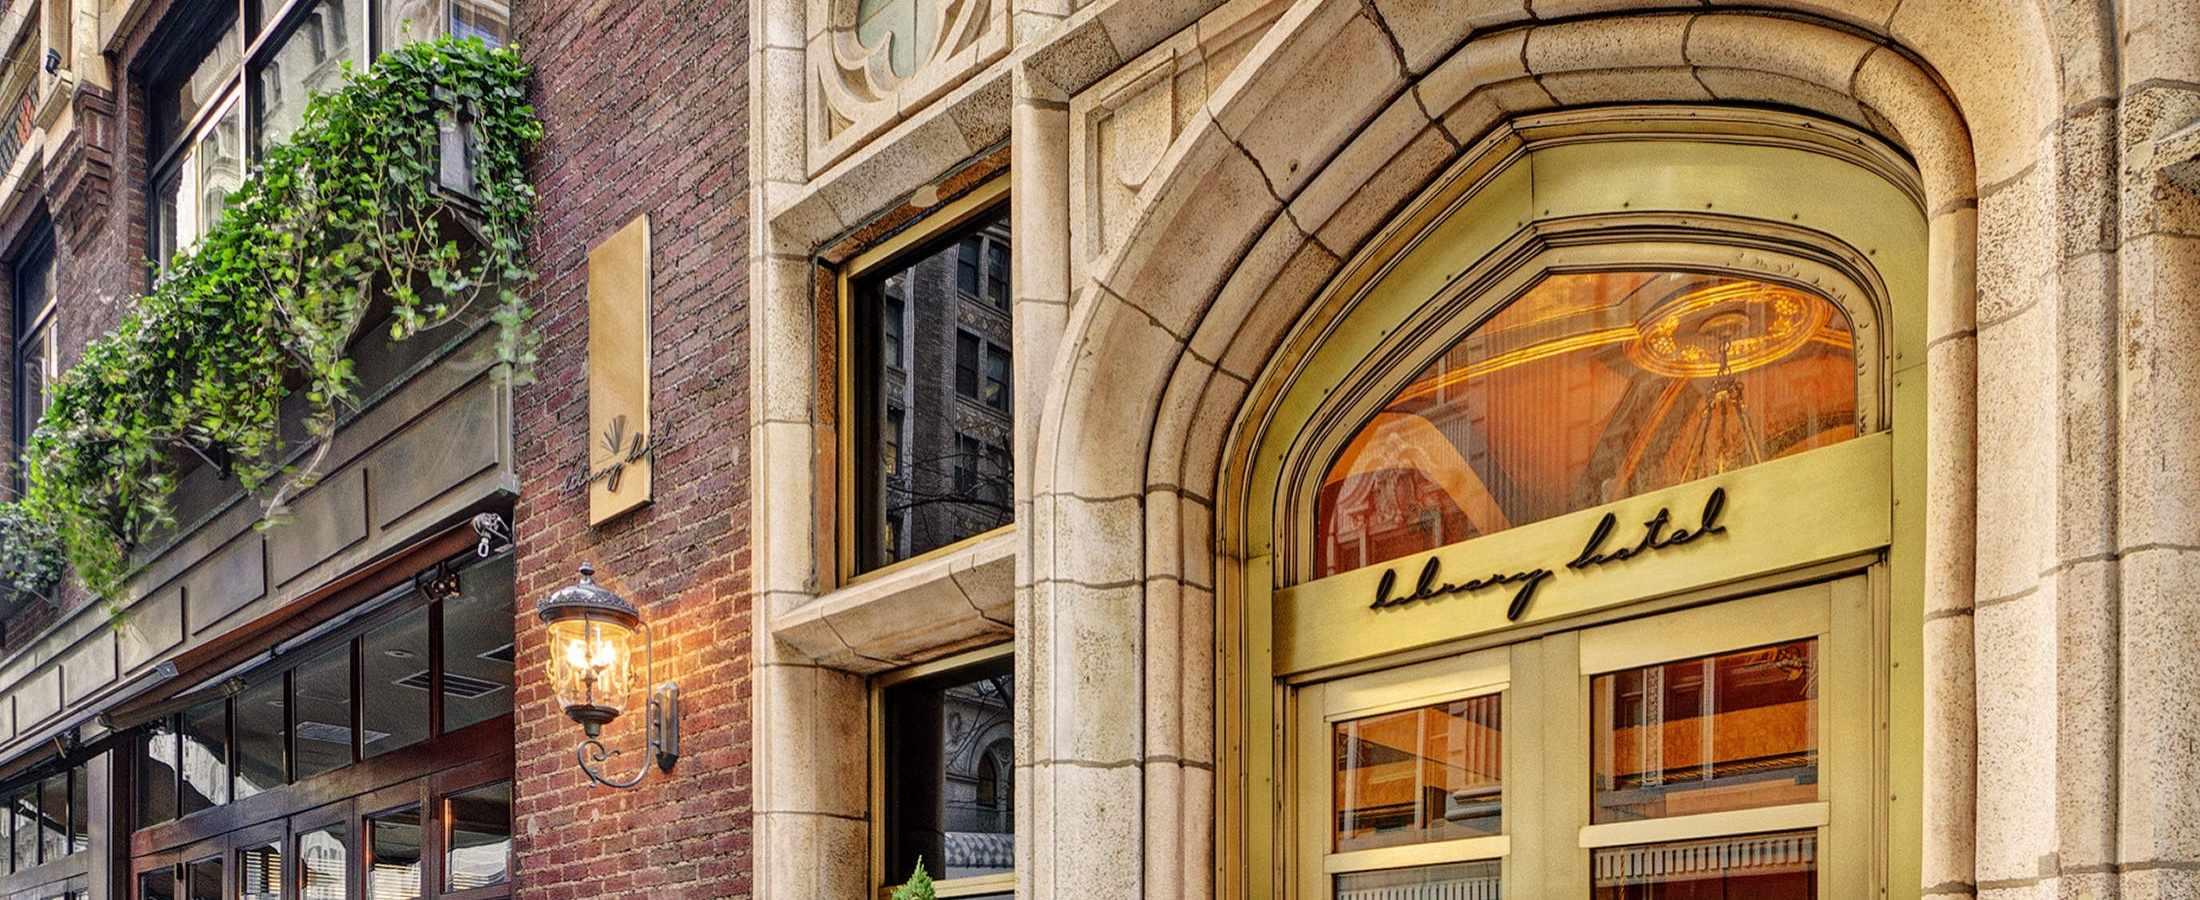 Library Hotel is centrally located in Midtown Manhattan, within walking distance to many of New York City's top attractions, and around the corner from all forms of public transportation.